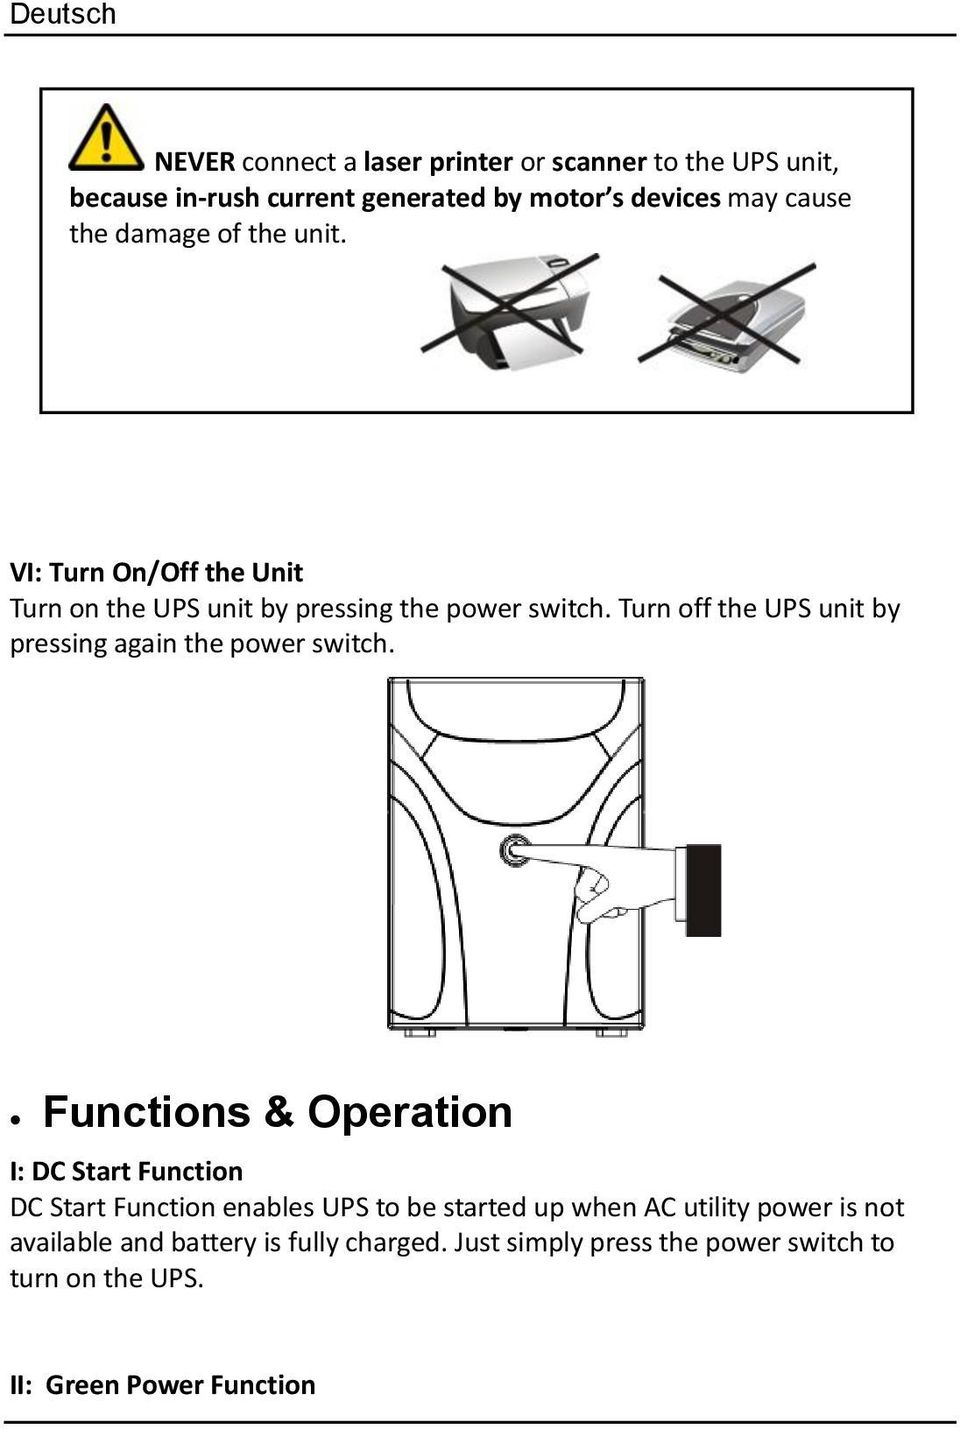 Turn off the UPS unit by pressing again the power switch.